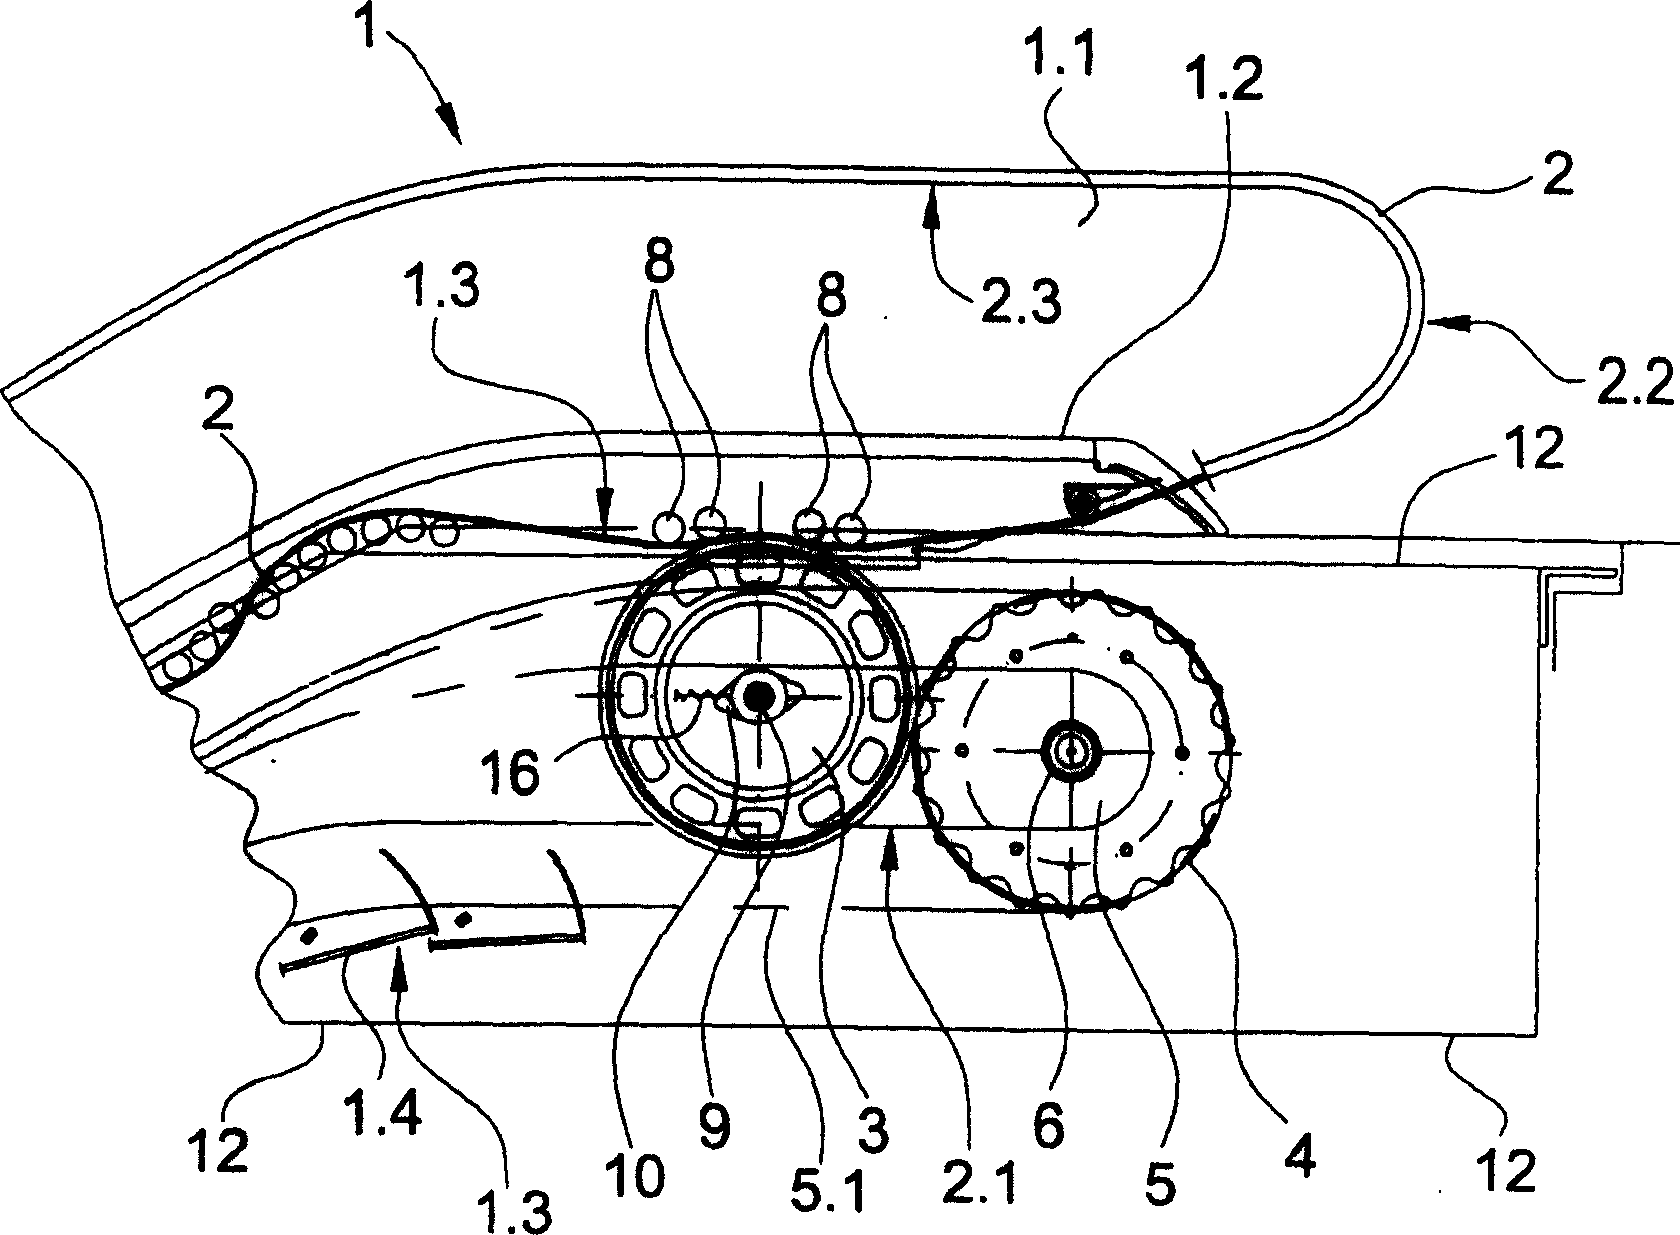 Handrail driving device for escalator or moving walkway